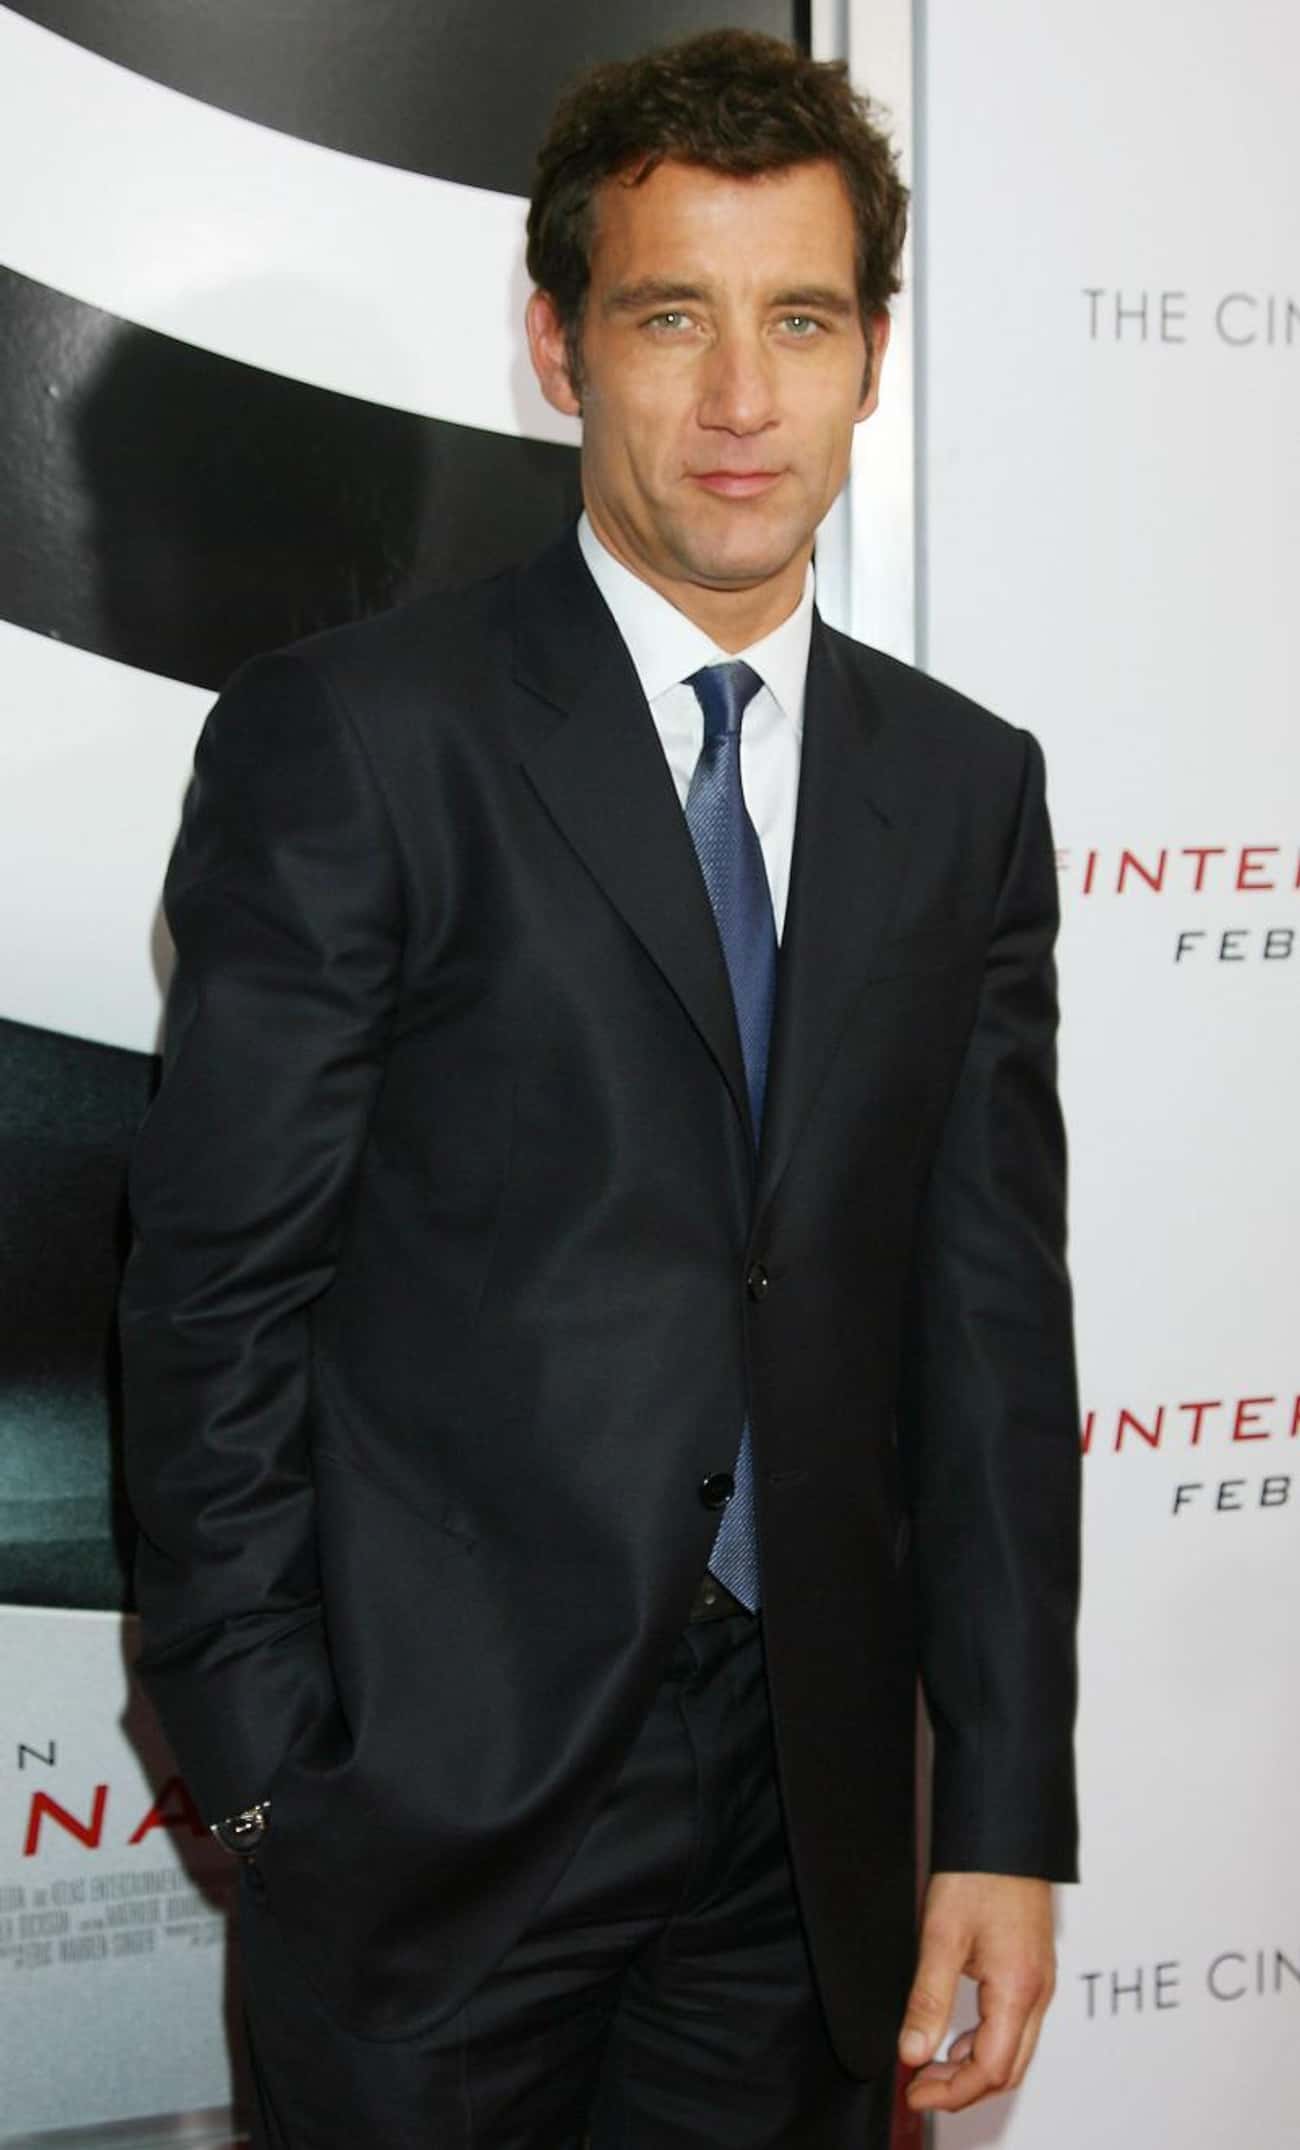 Clive Owen in Black Tux Paired with White Long Sleeves and Navy Blue Tie